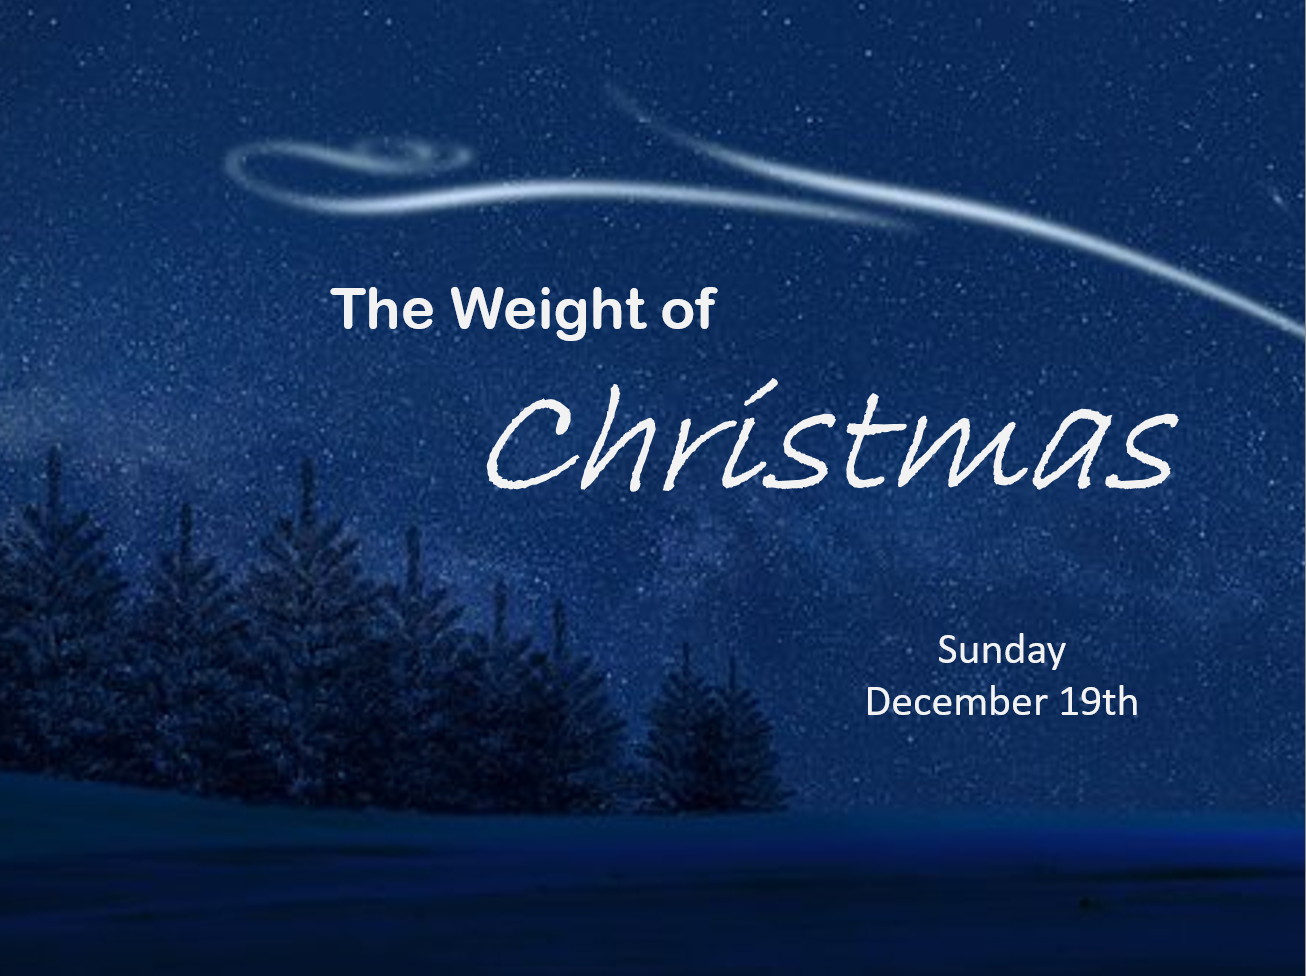 Dec 19 2021   The Weight of Christmas! /></a>
							<header>
								<h3><a href=